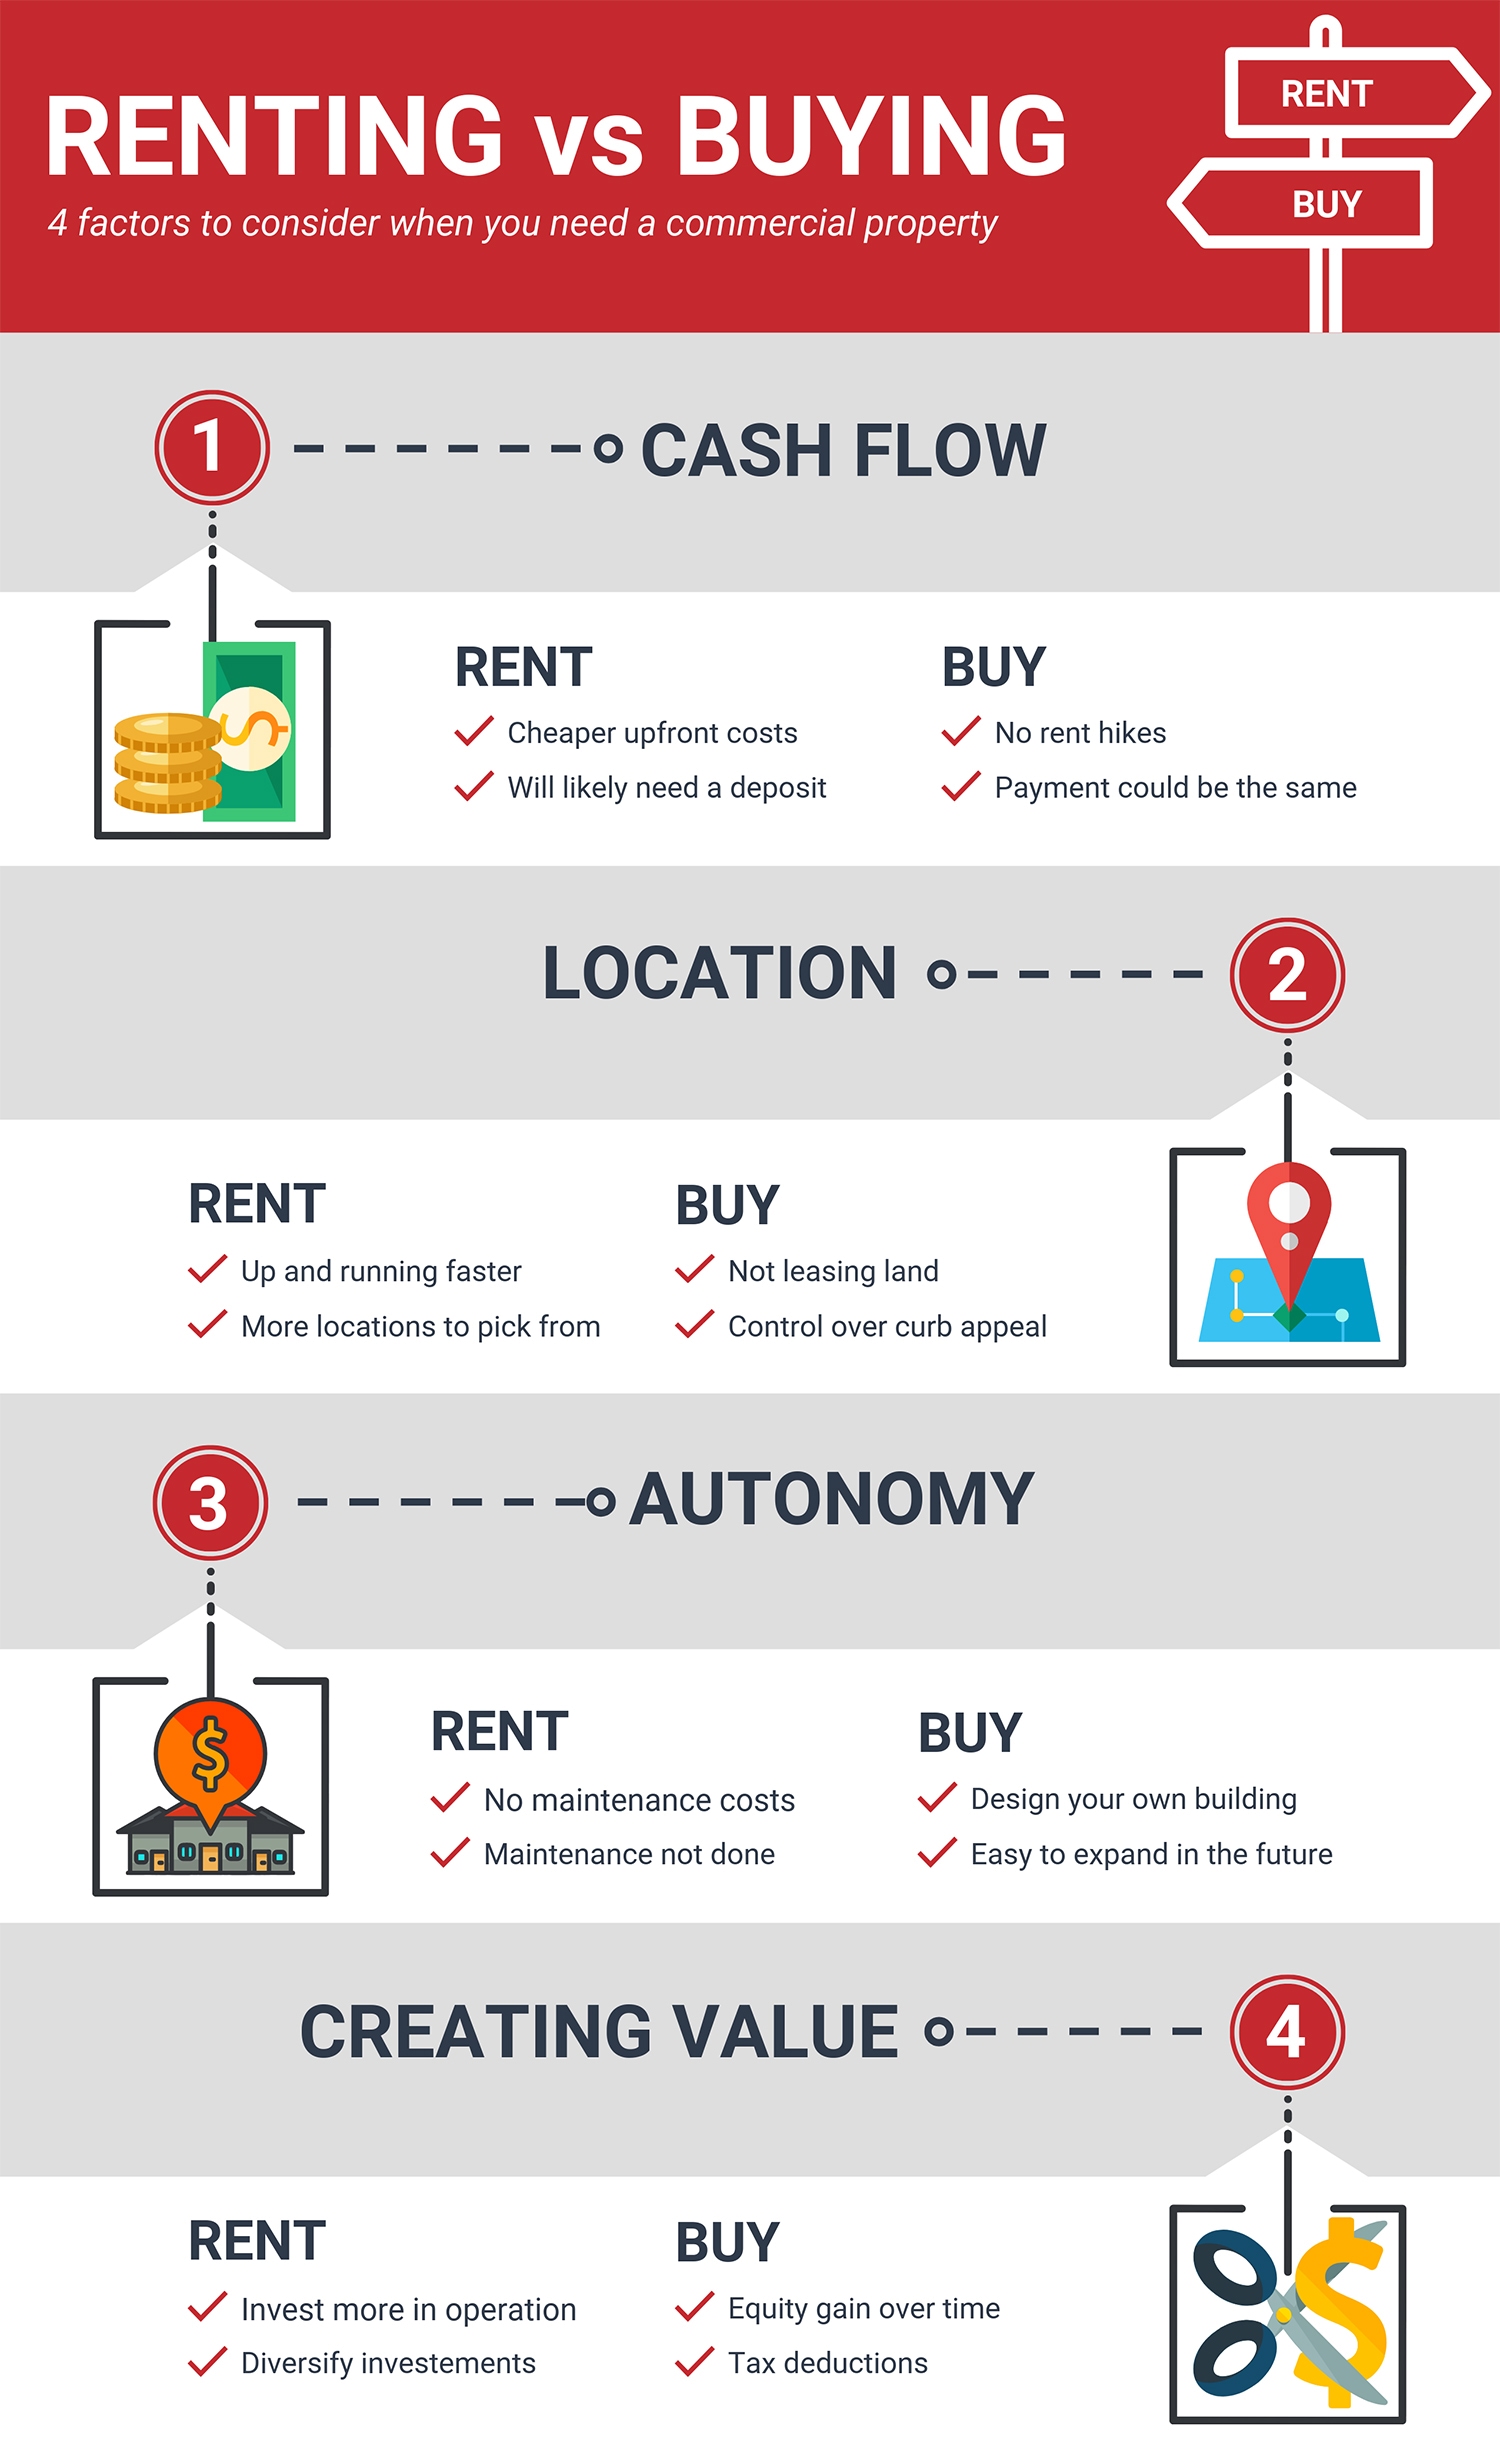 Renting vs Buying Commercial Building Infographic